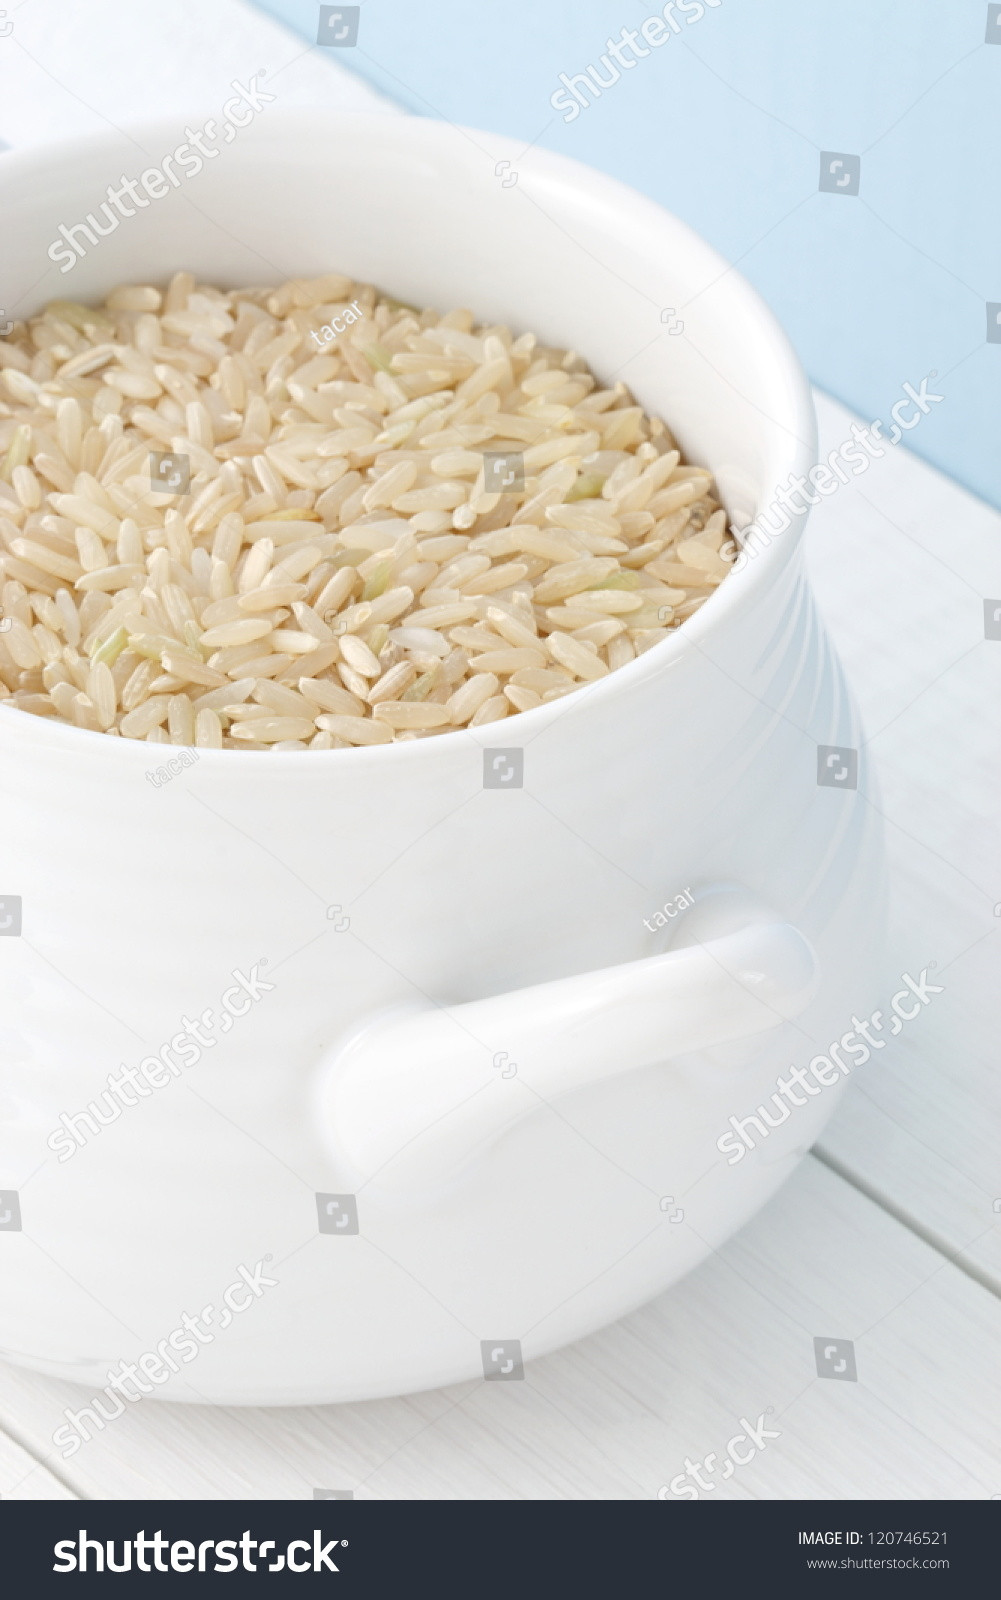 Fiber In Brown Rice
 Nutritious Brown Rice Whole Grain That Delivers Fiber